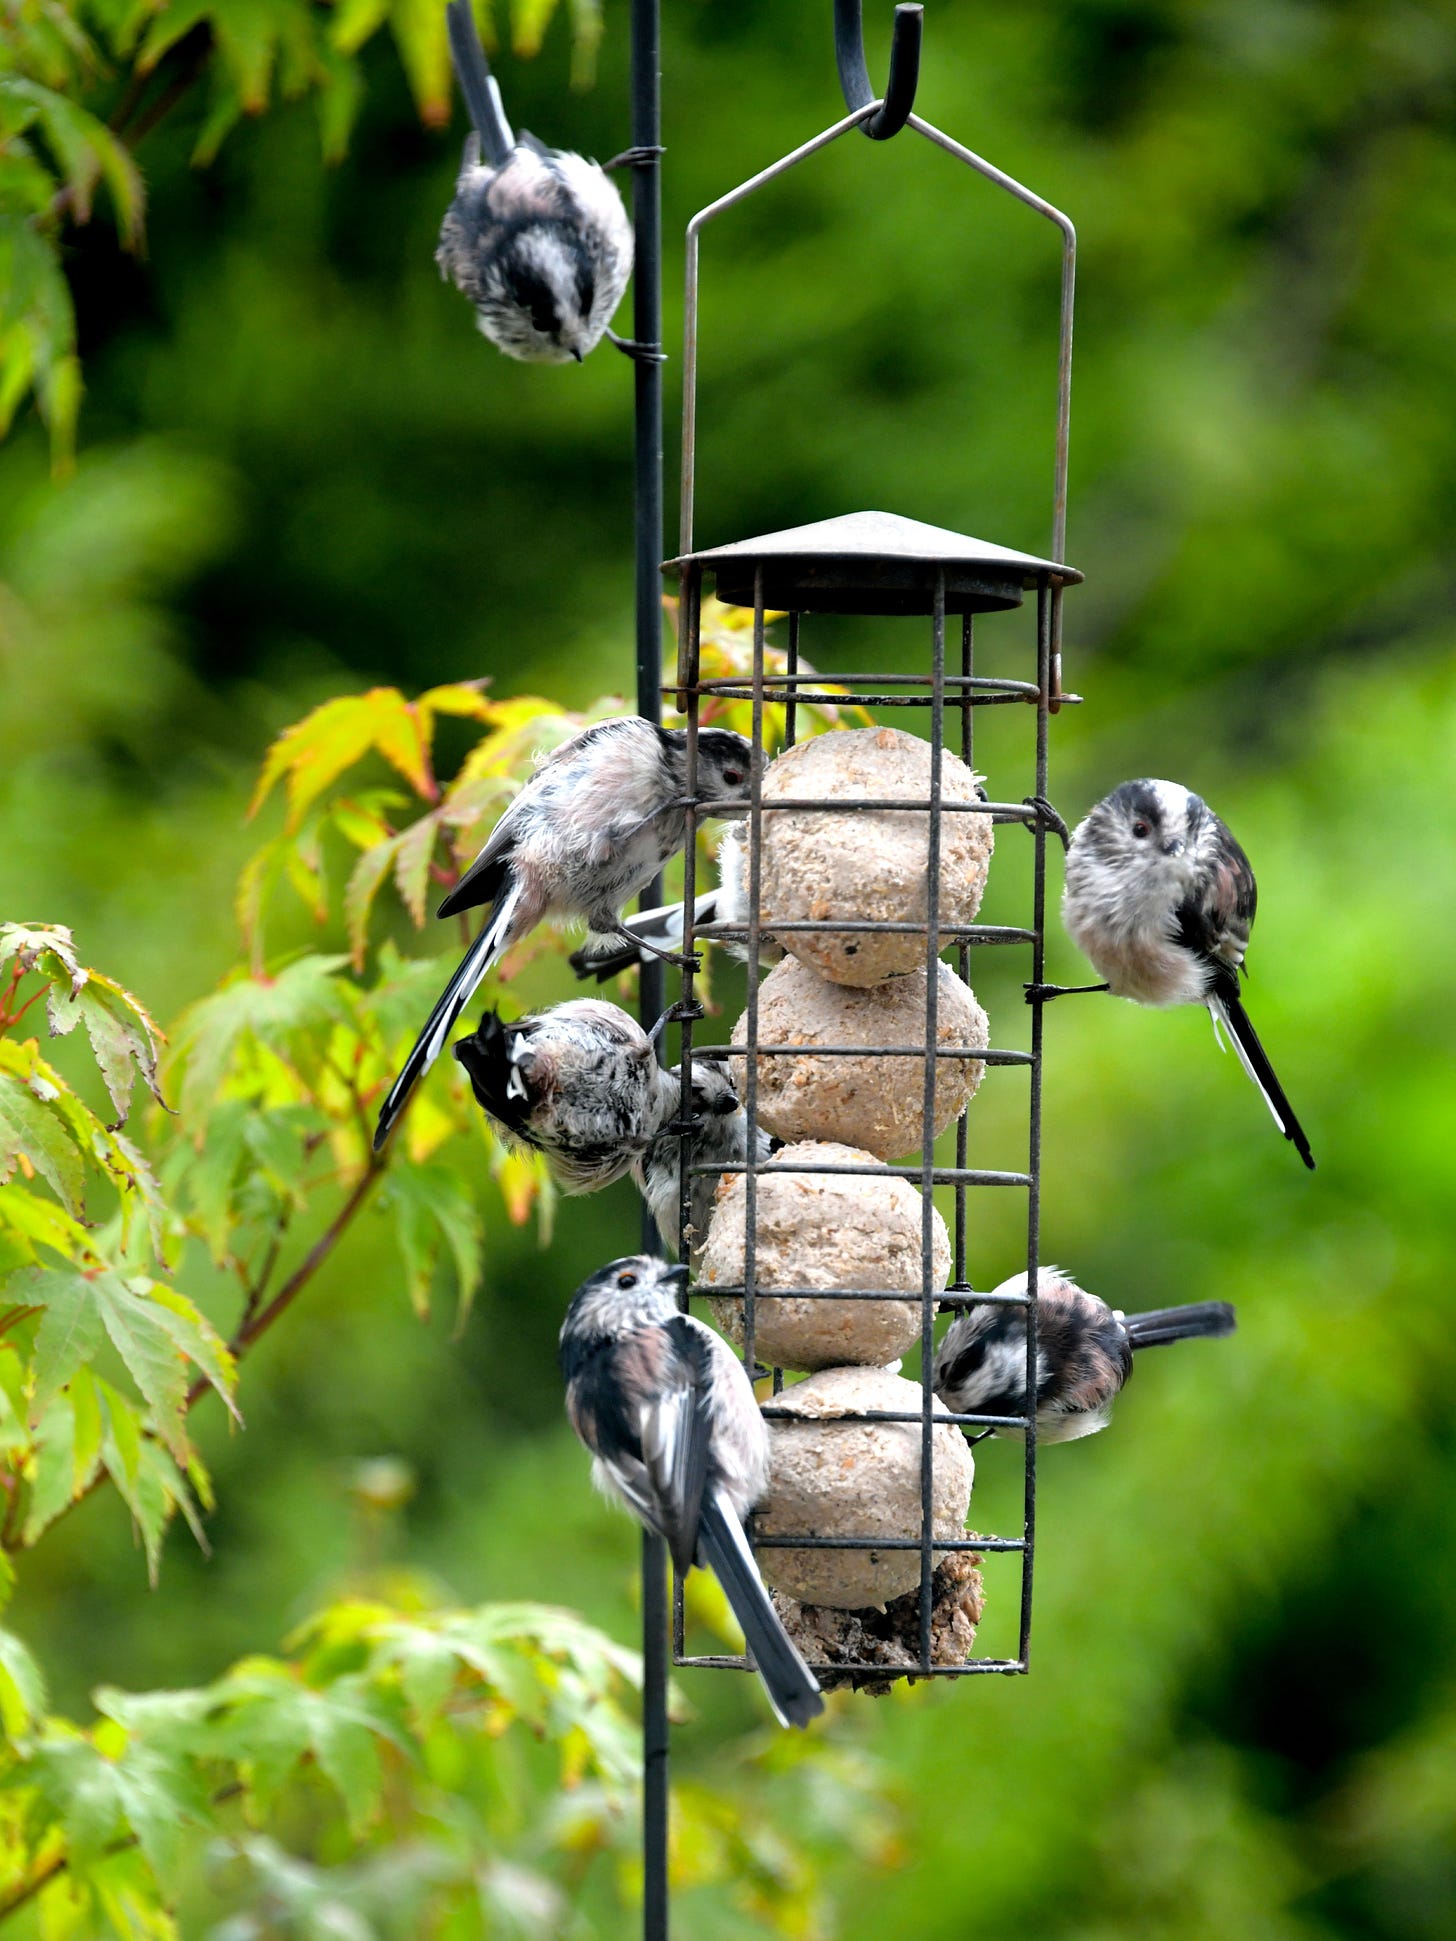 Photo shows 6 long-tailed tits - small fluffy birds with long tails, all on a bird feeder full of fat balls